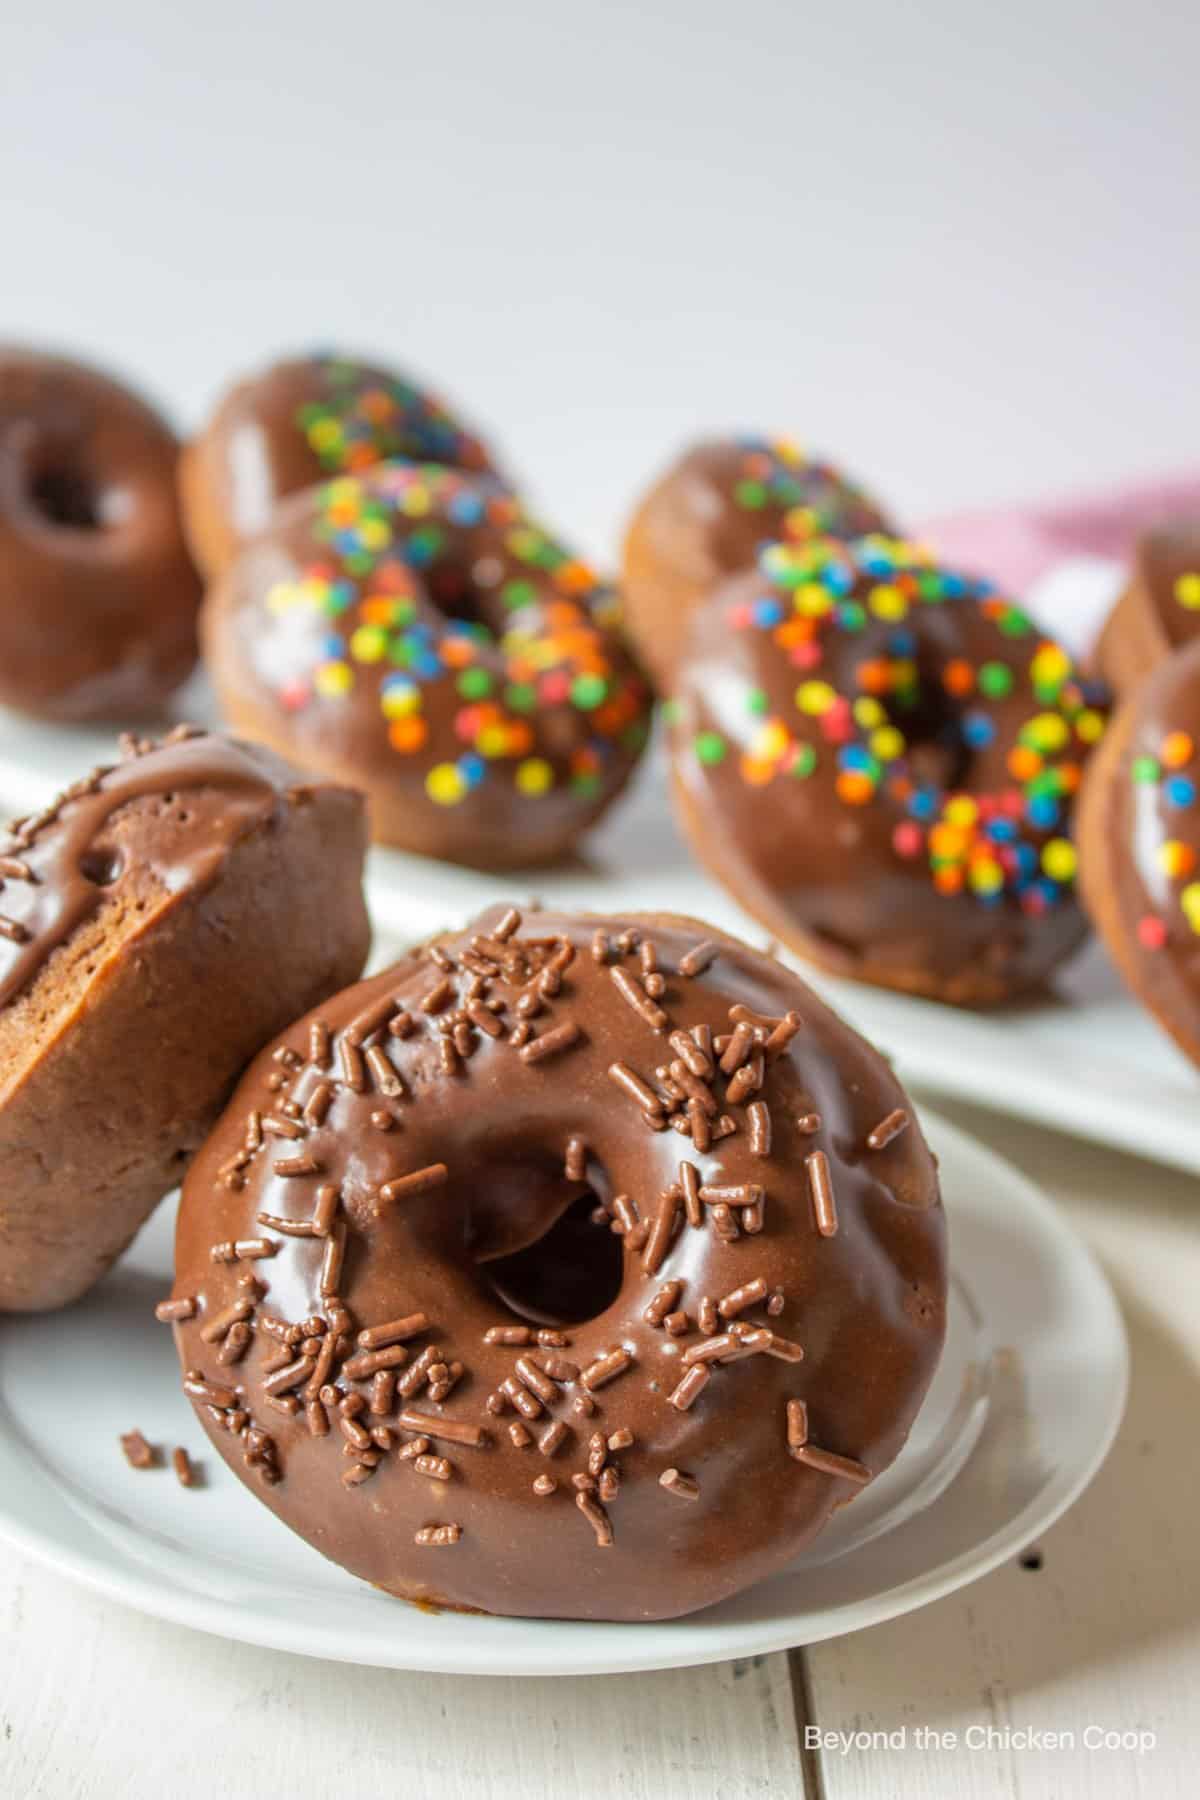 Baked donut with glaze and chocolate sprinkles. 